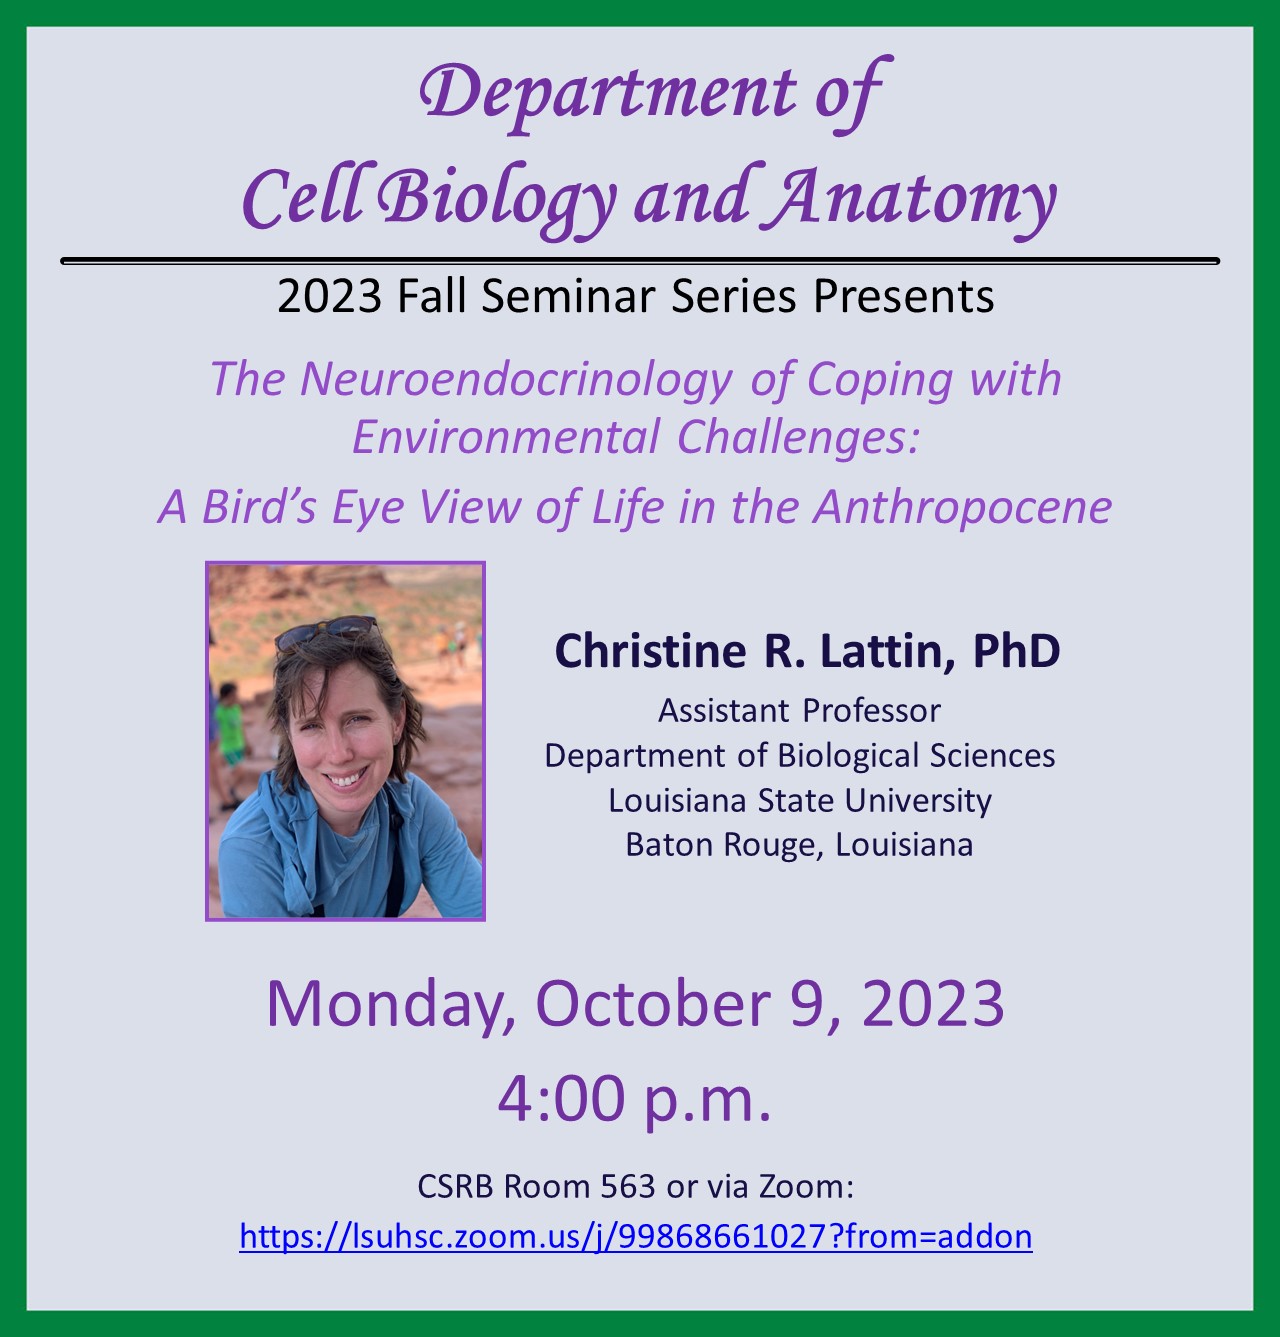 Event Title: Department of Cell Biology and Anatomy 2023 Fall Seminar Series Christine Lattin, PhD, Event Date: October 09, Starting at 04:00 PM and ending at 05:00 PM in Building: Clinical Sciences Research Building Room: 563